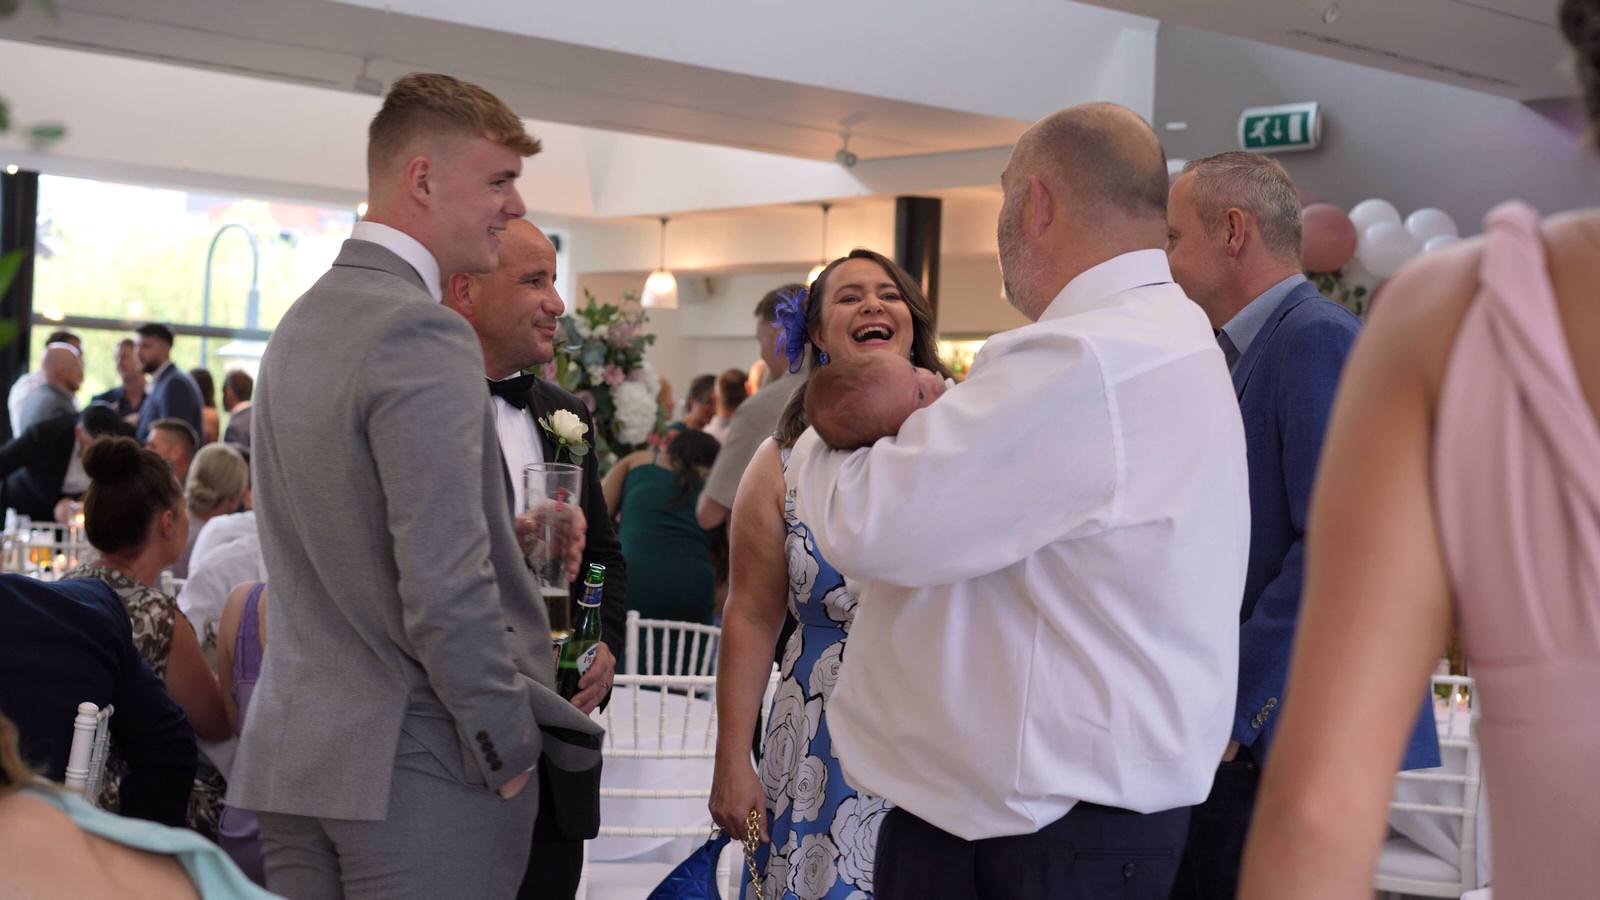 guests mingle and laugh during wedding reception